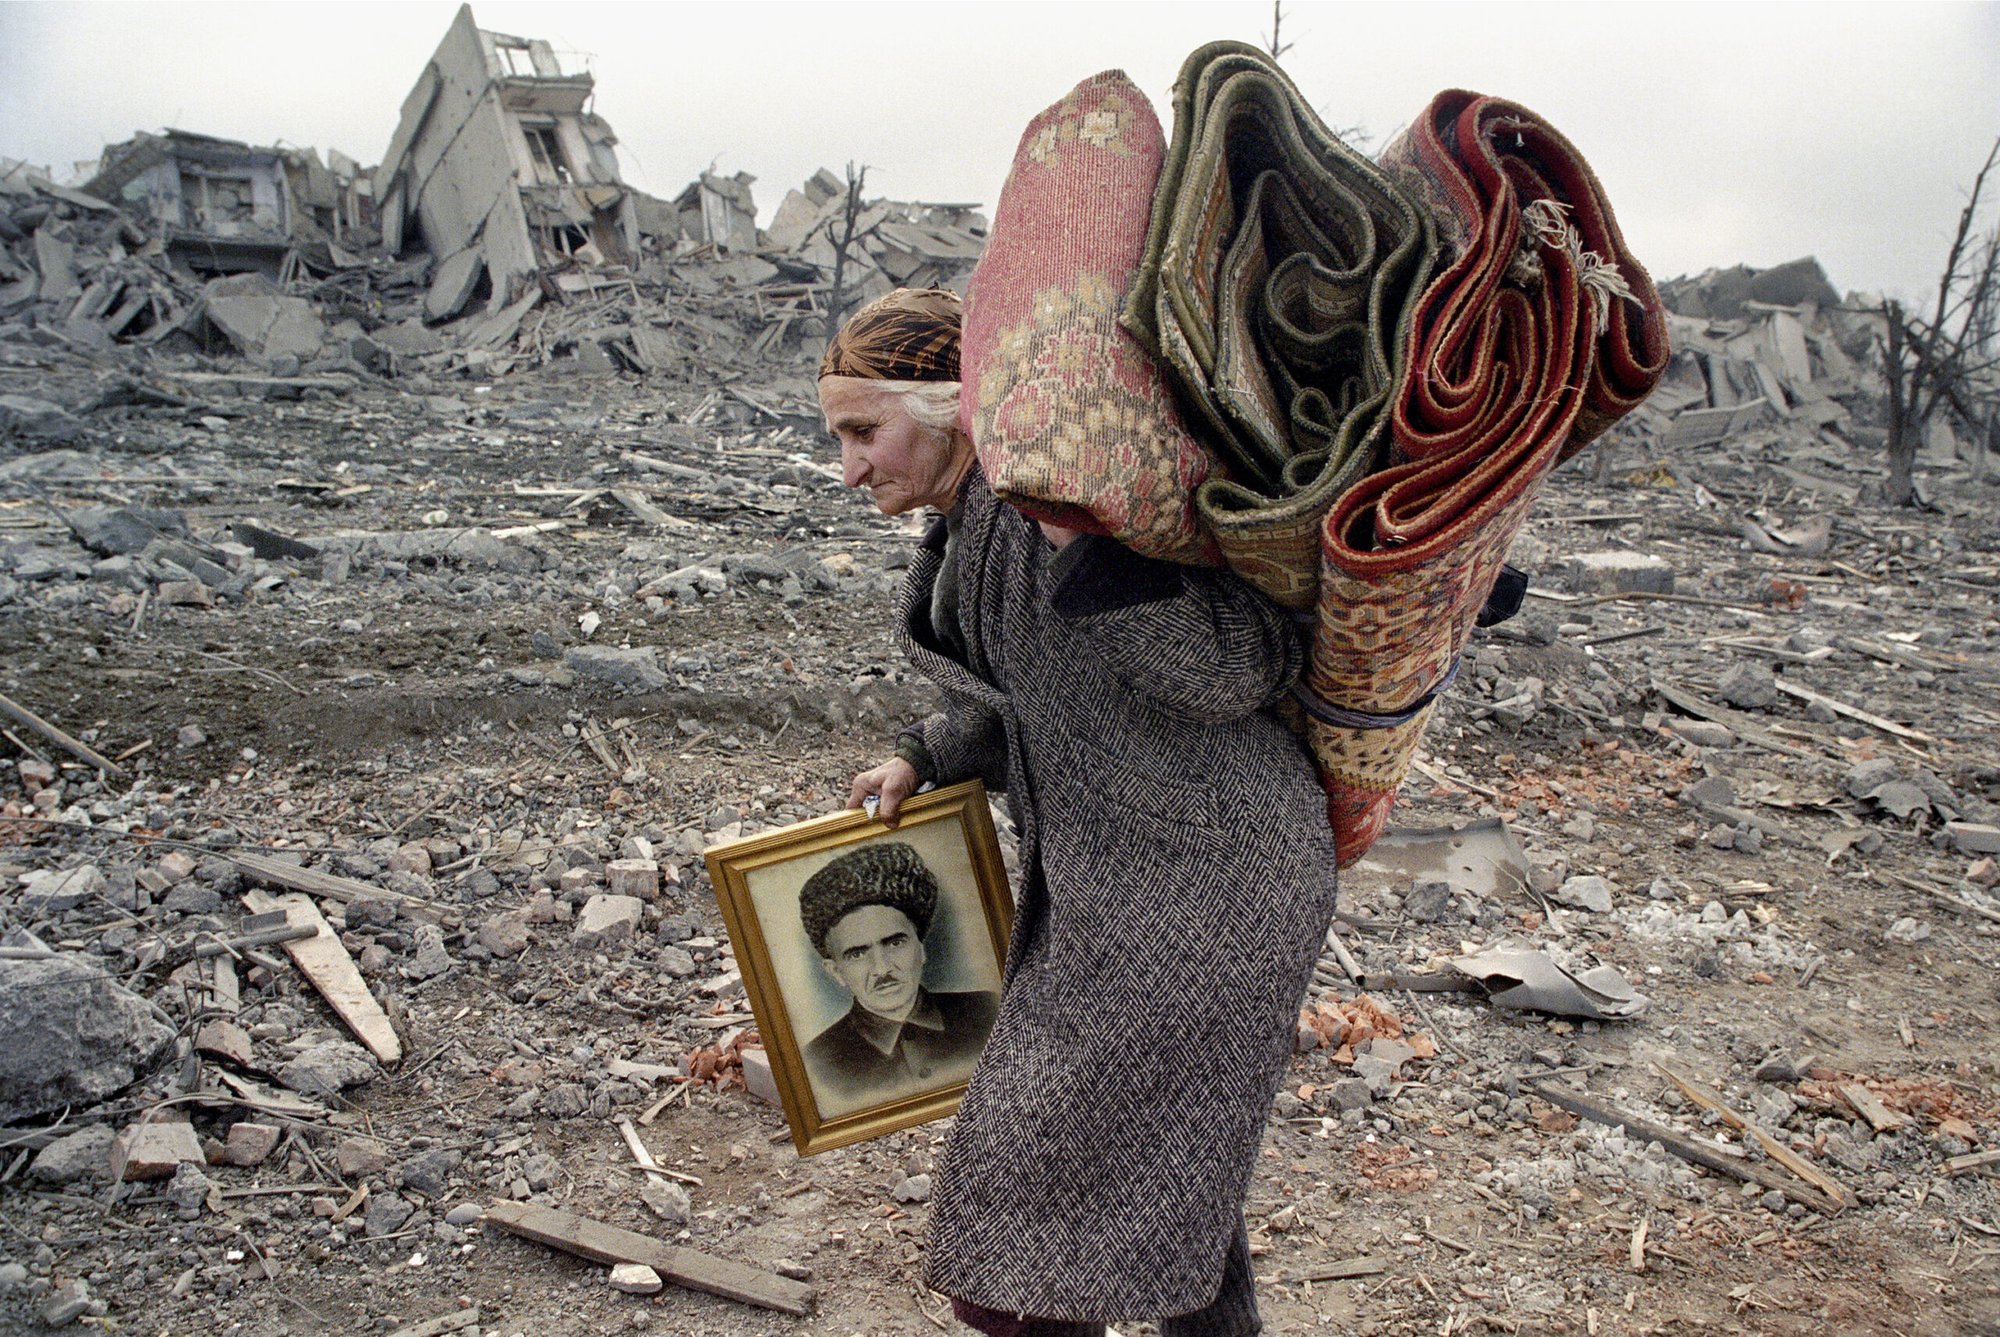 A Chechnyan woman carries a portrait of her husband and two carpets, while walking in the middle of ruins and rubble.